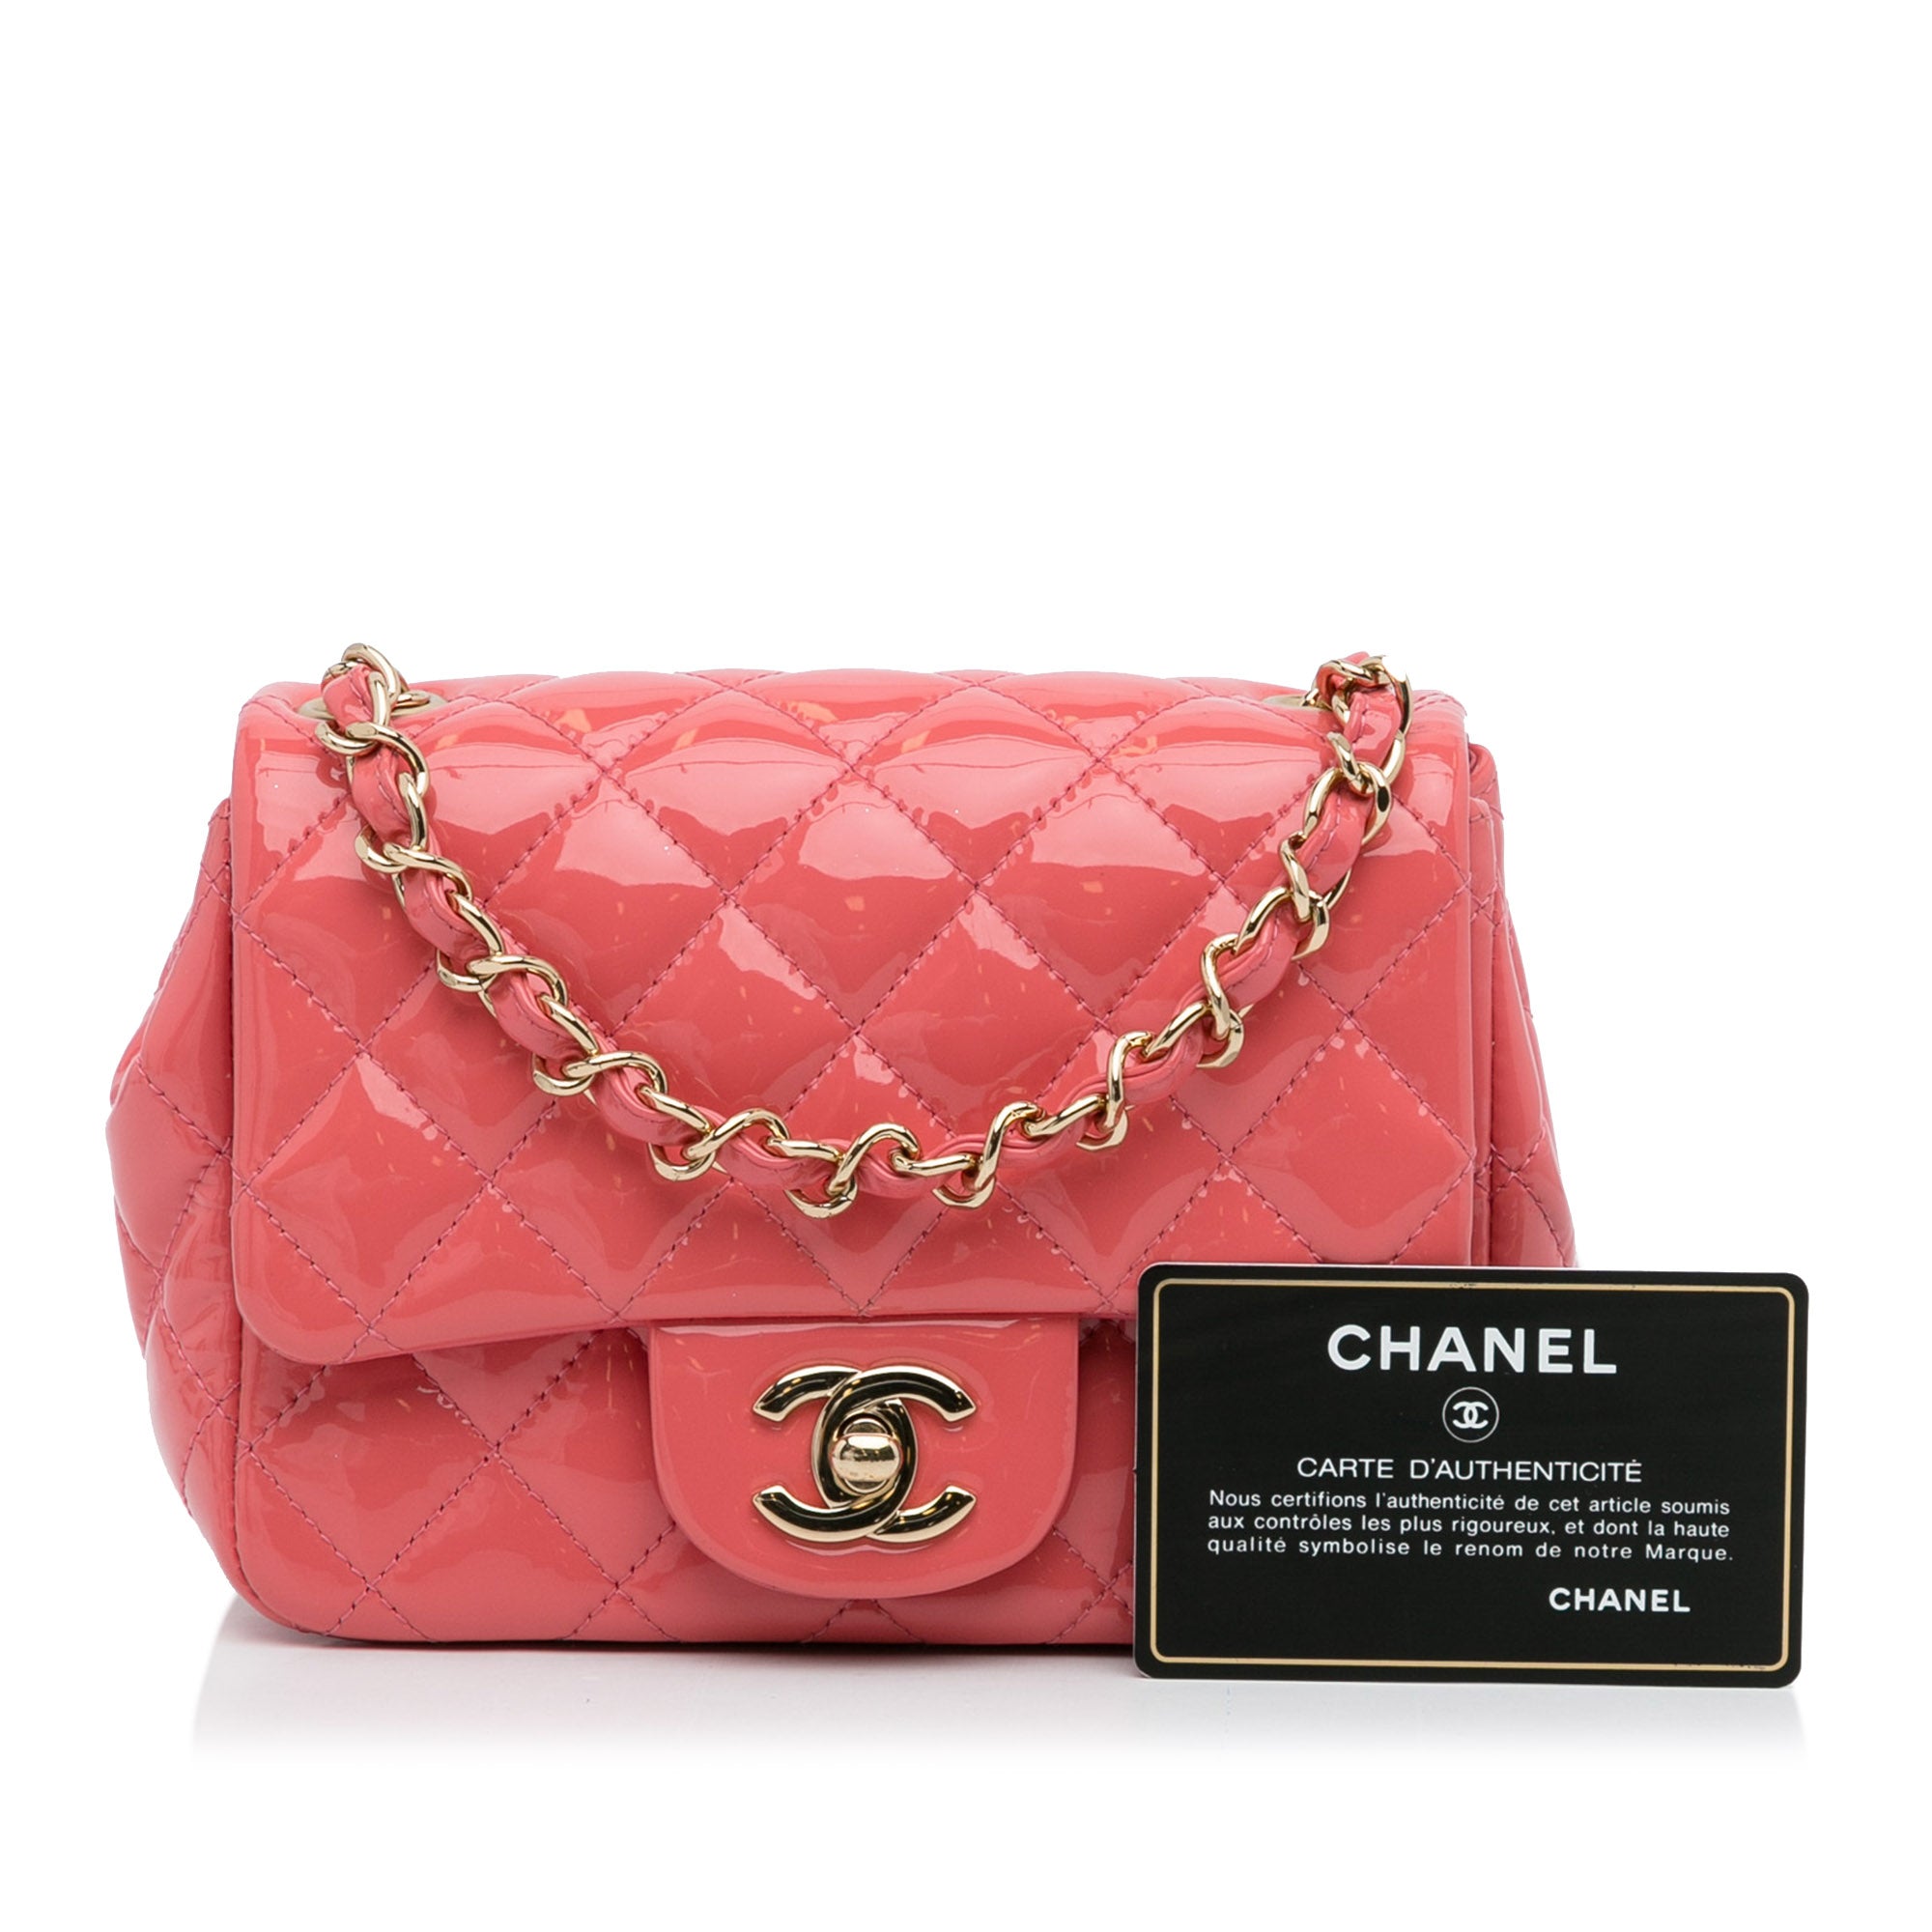 New Chanel Square Flap Beige Quilted Leather Red Patent Chain Shoulder Bag